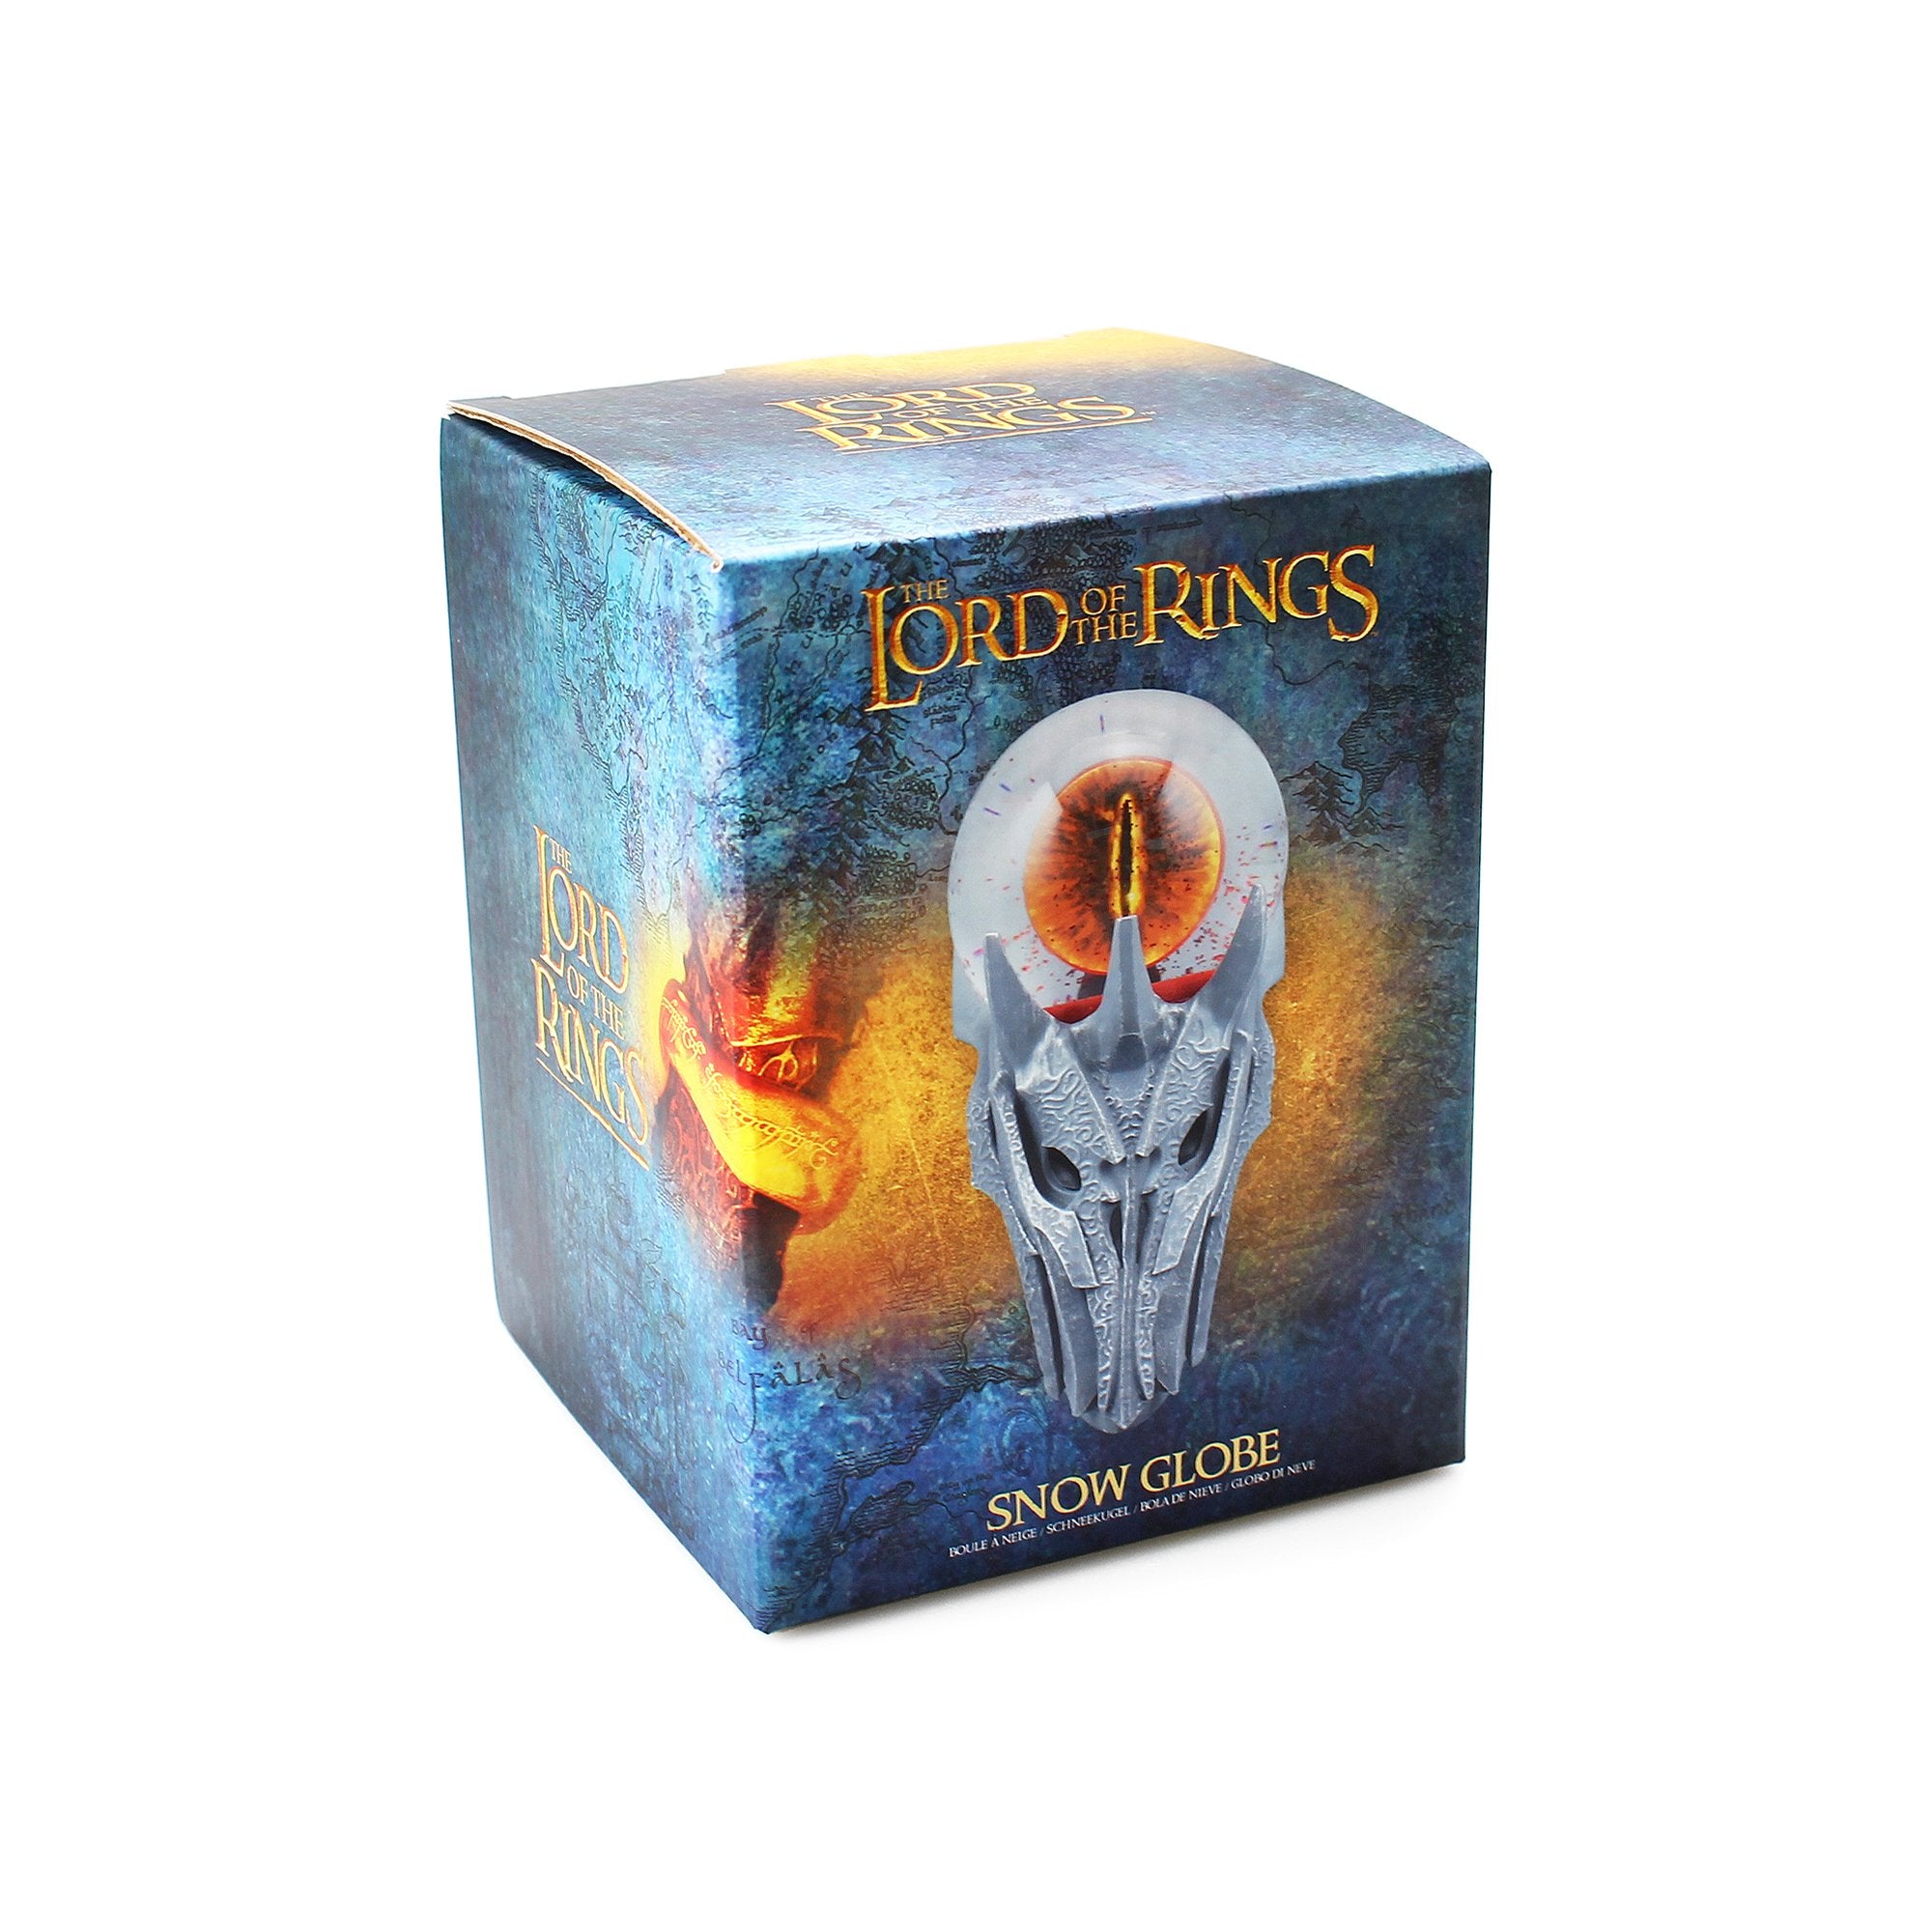 Snow Globe Boxed (65mm) - Lord of the Rings